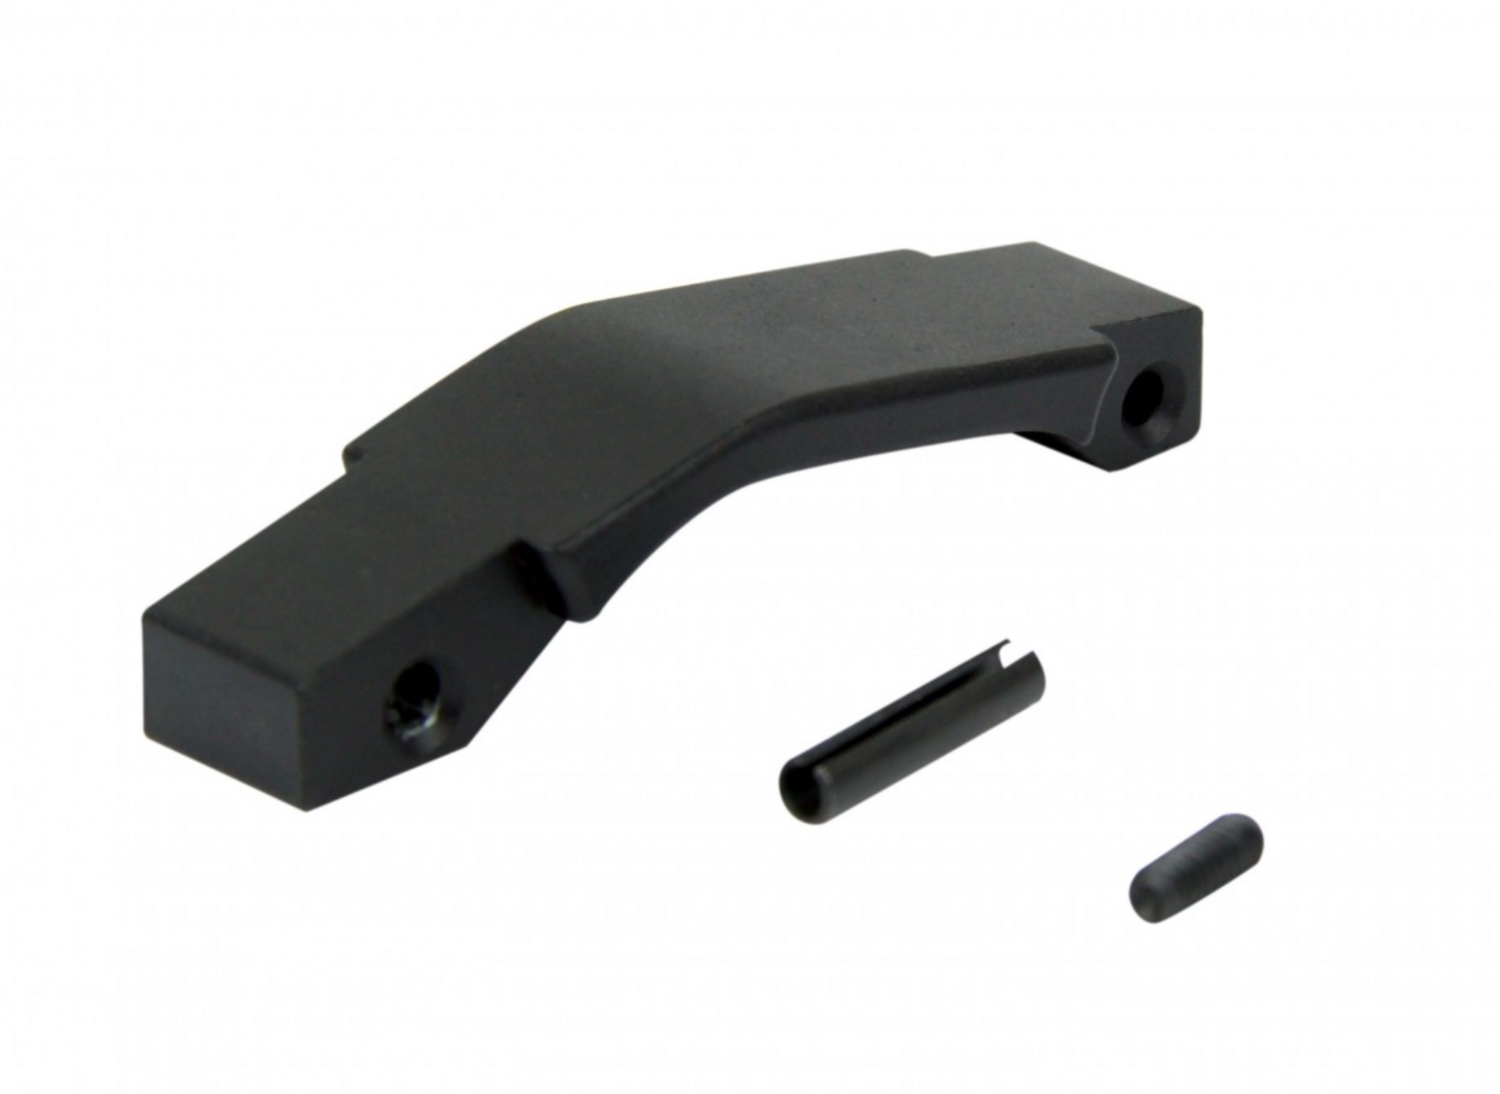 Tacfire Trigger Guard W/ Pin For AR-15/M4 Style Rifles